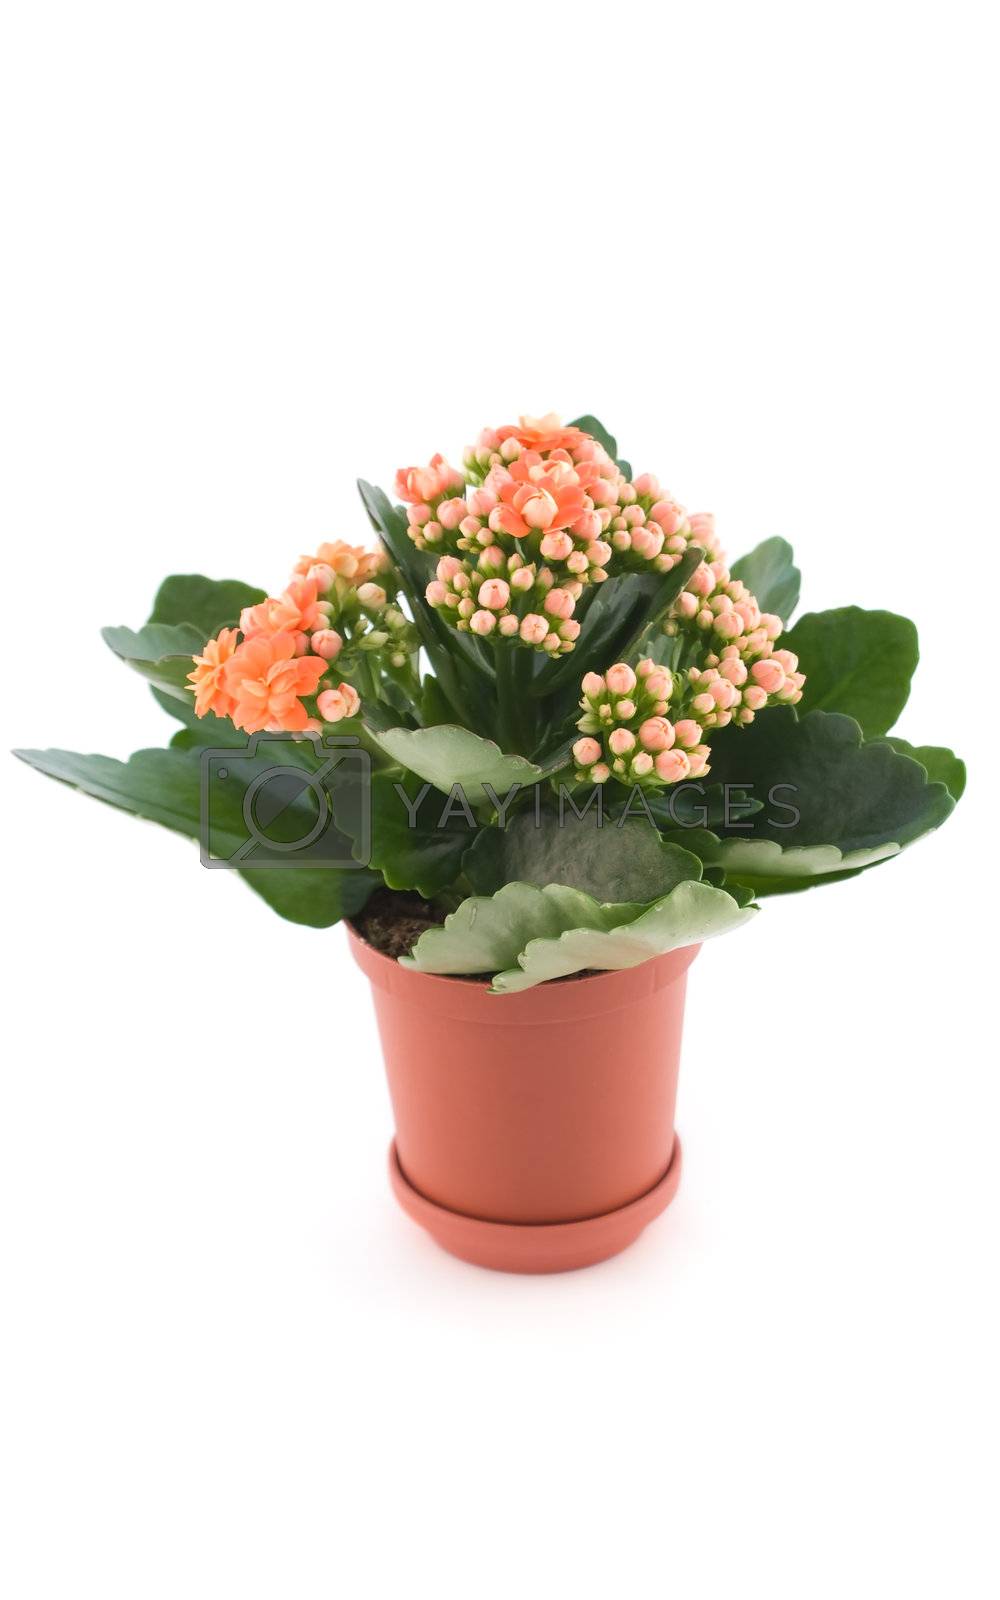 Royalty free image of Kalanchoe with red flower in pot by mangost